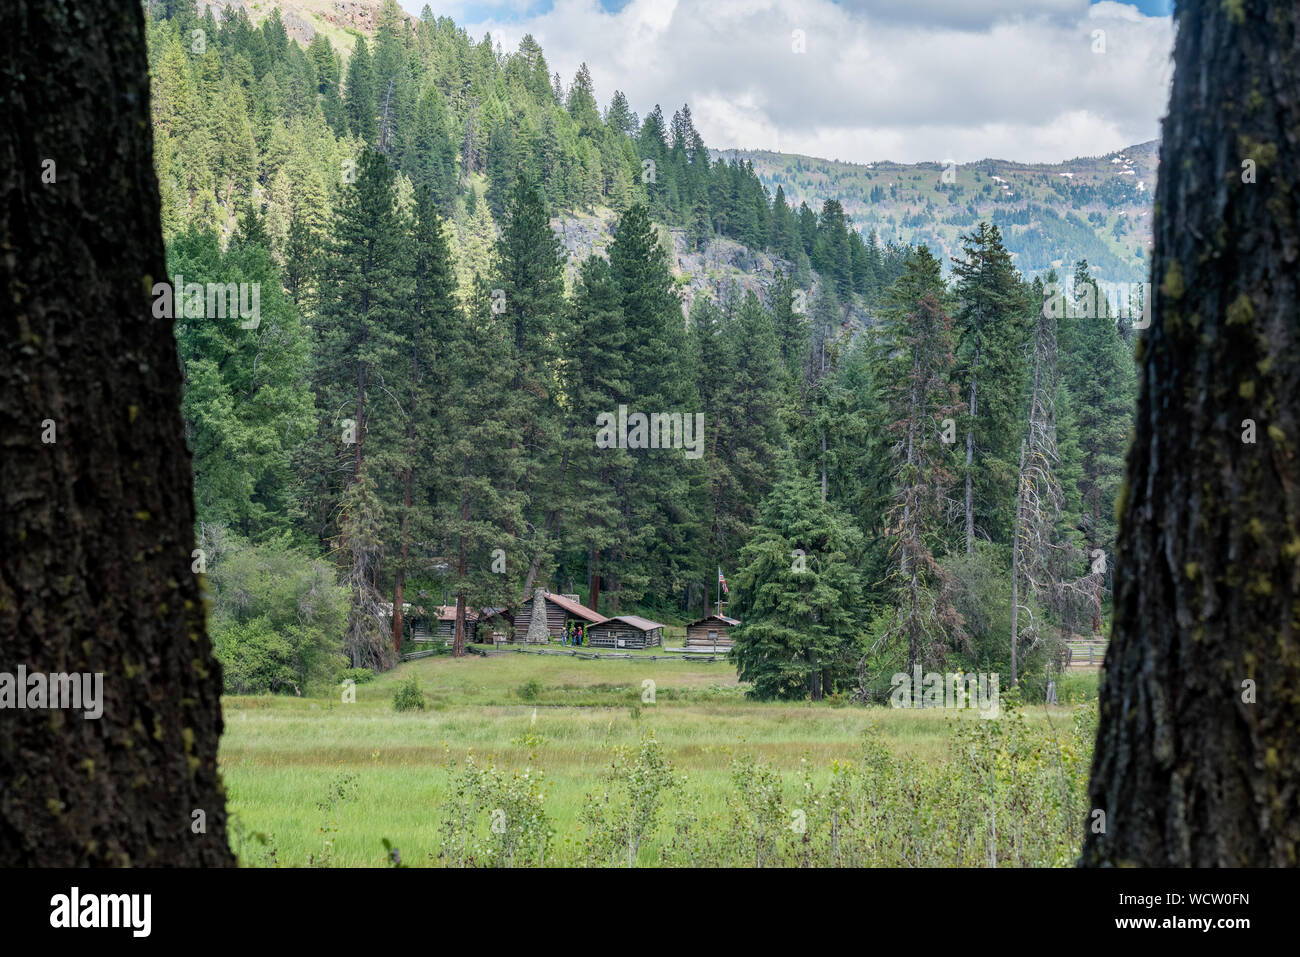 Reds Horse Ranch in Oregon's Wallowa Mountains. Stock Photo